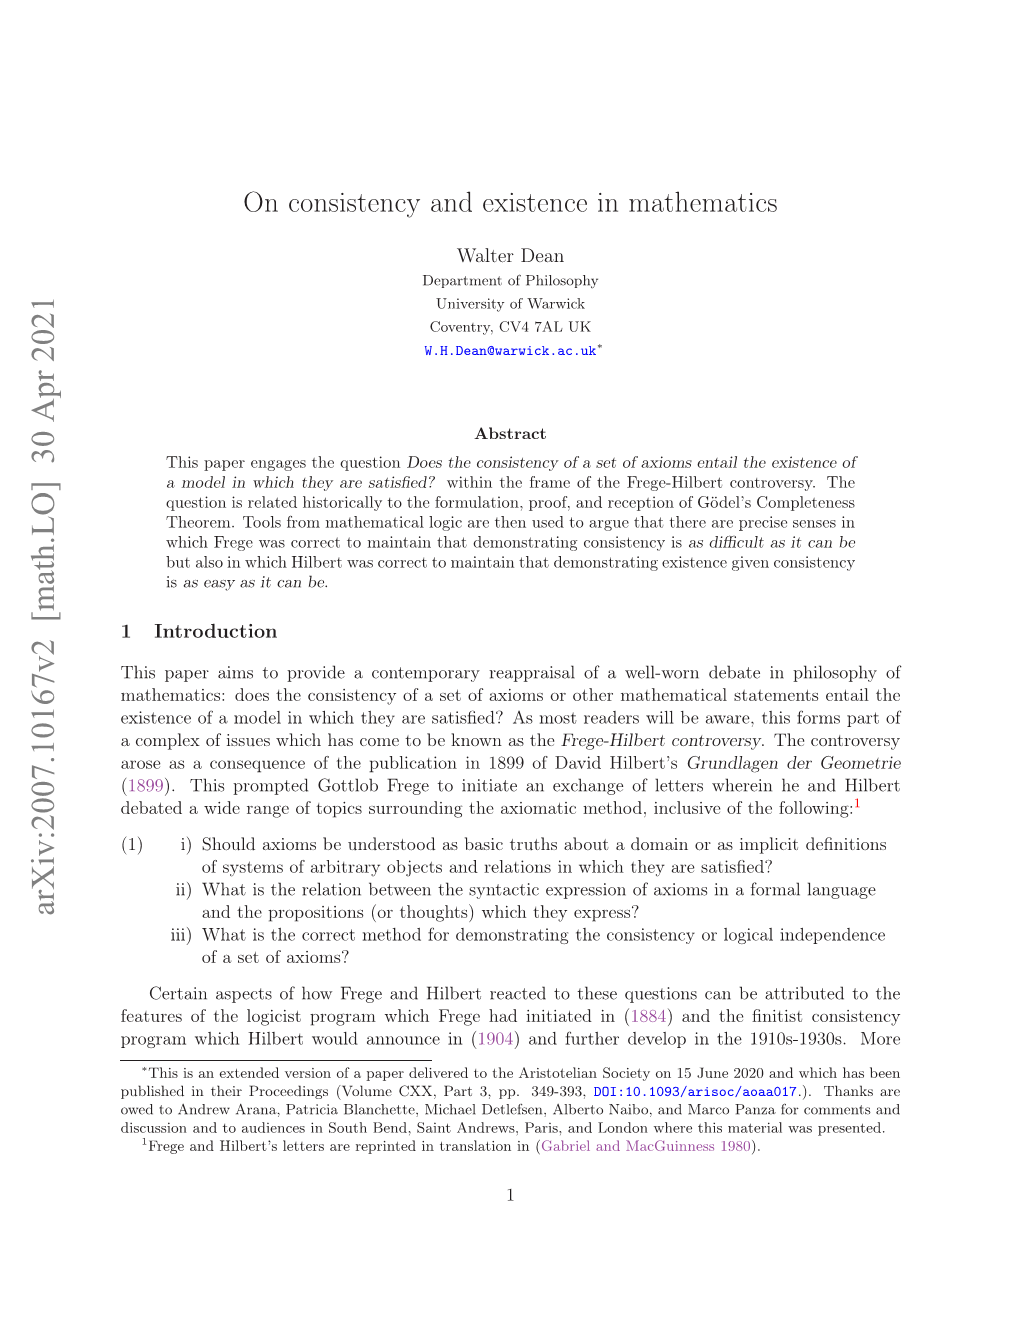 On Consistency and Existence in Mathematics